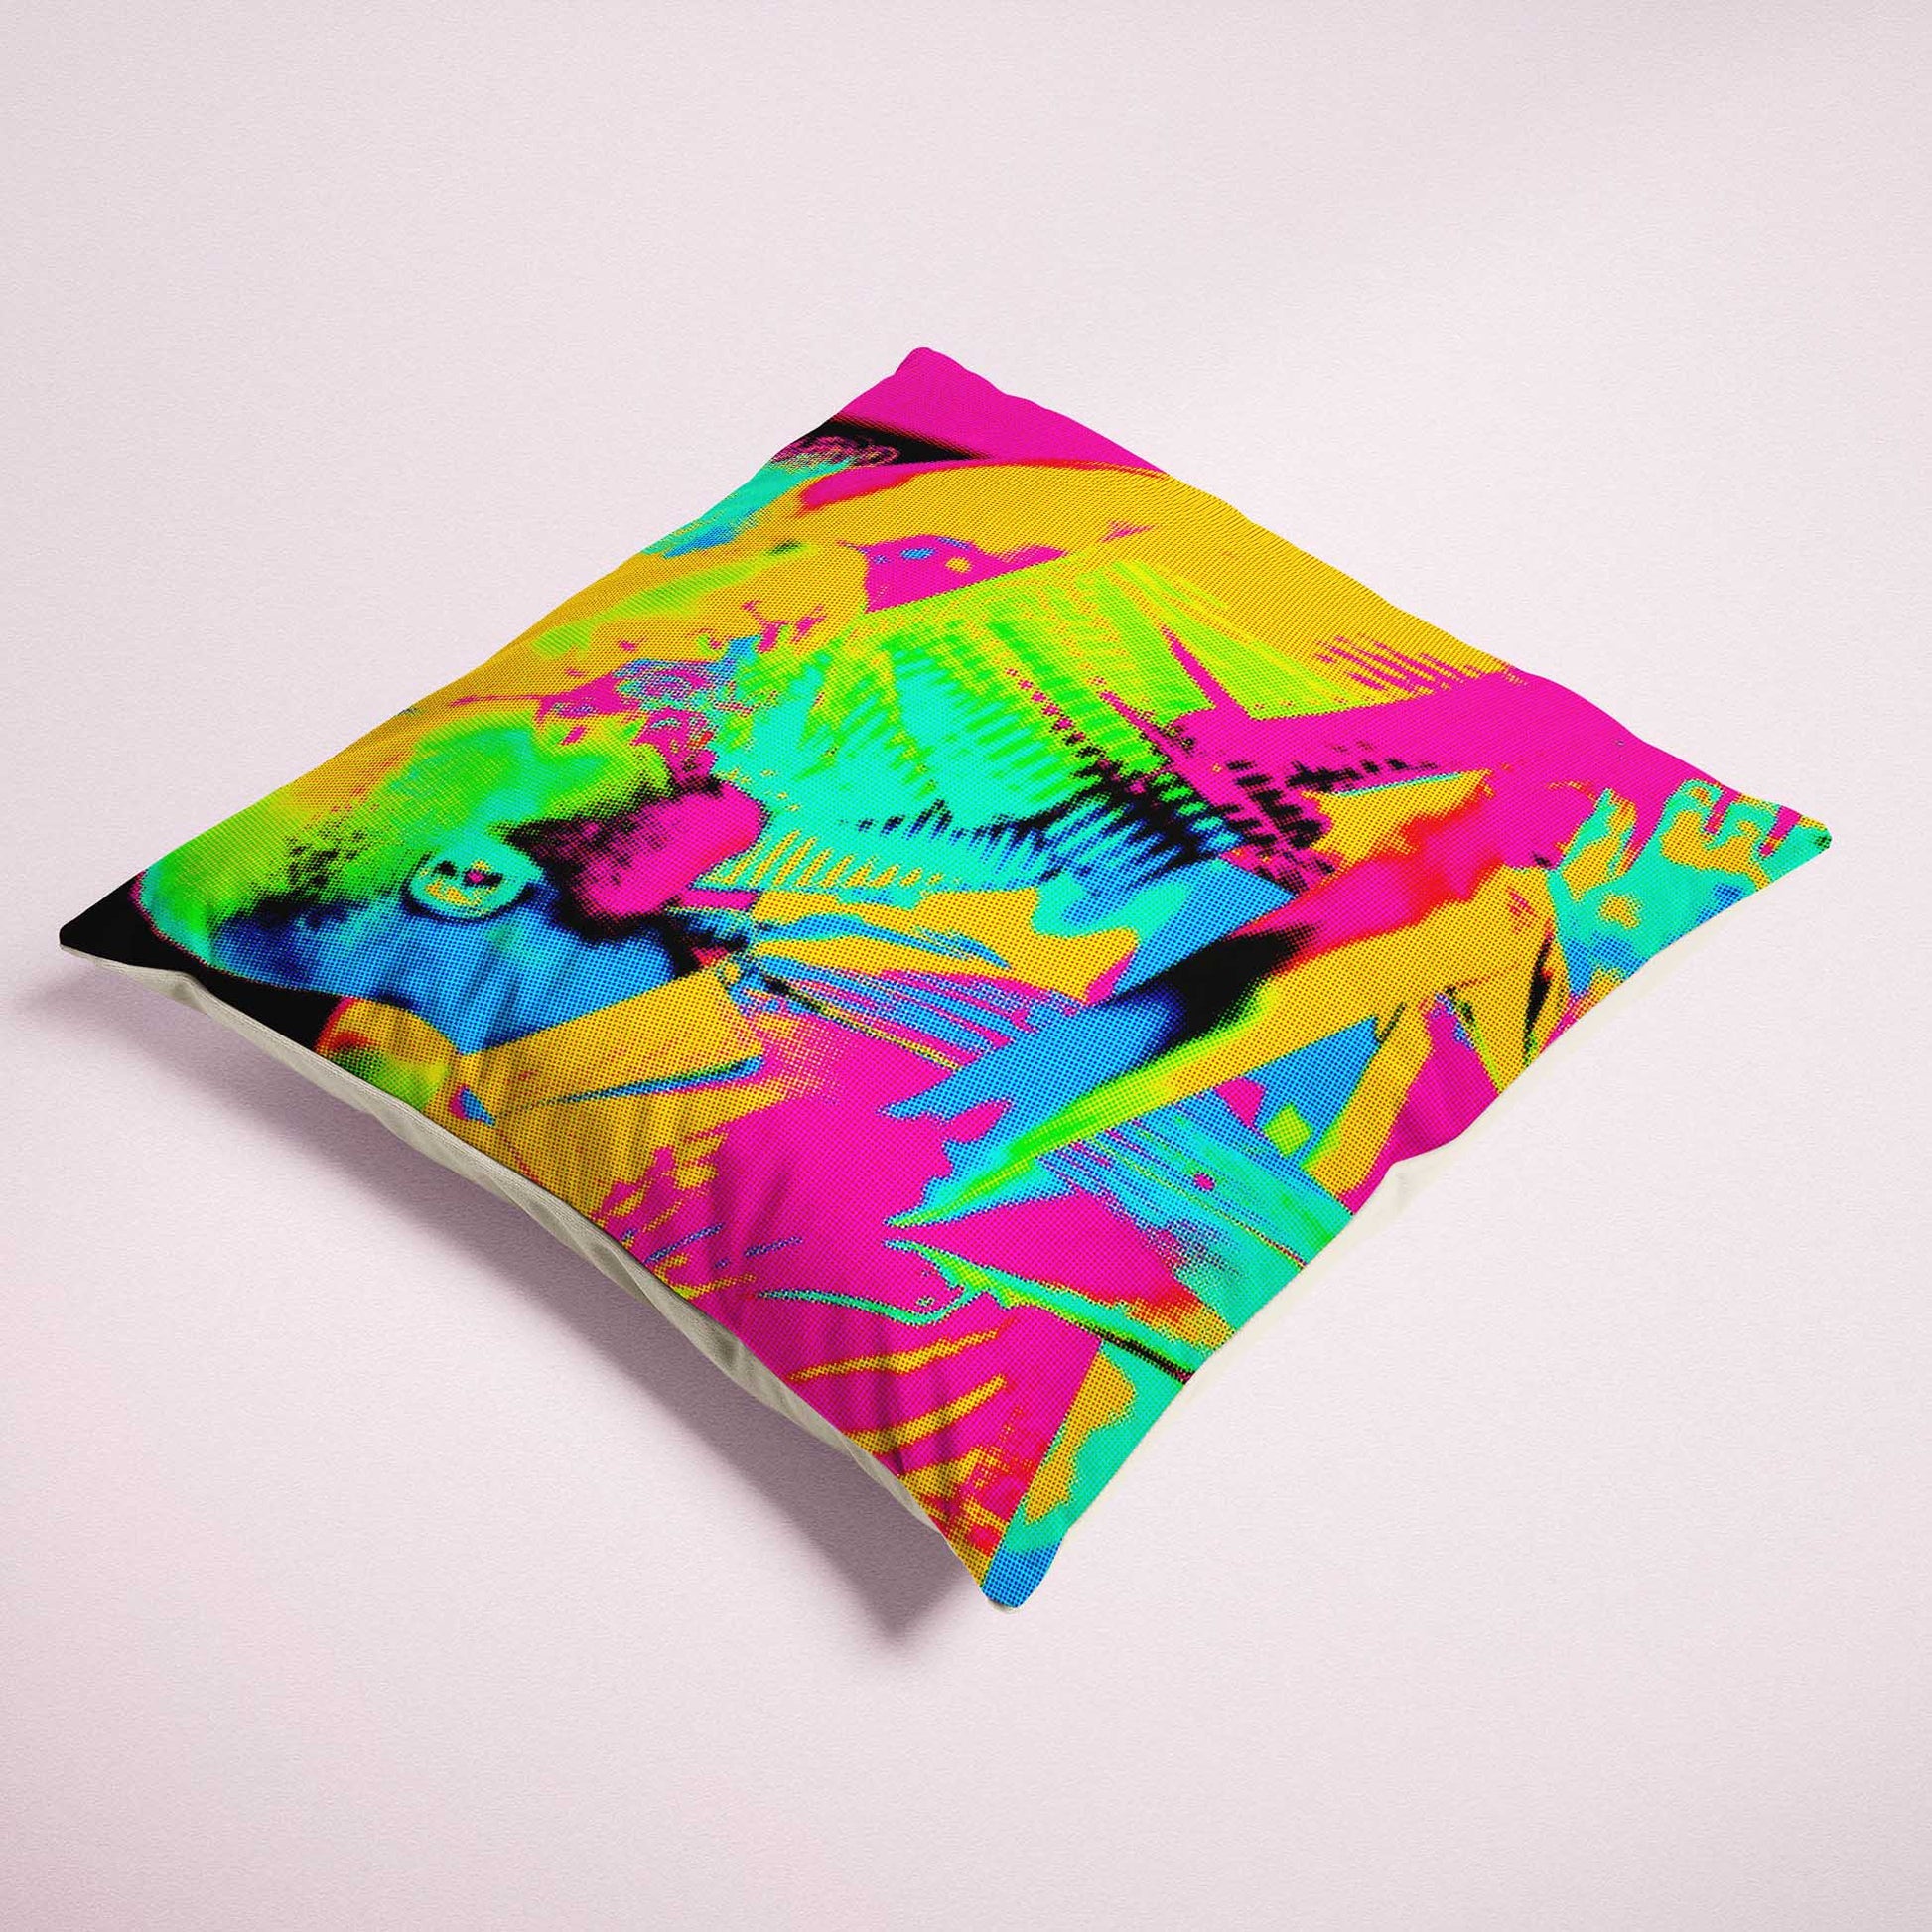 Immerse yourself in a world of imagination and creativity with the Personalised Pop Art Cushion. Printed from your photo, it features a unique and quirky design that sparks inspiration. Handmade with soft velvet, luxury and comfort